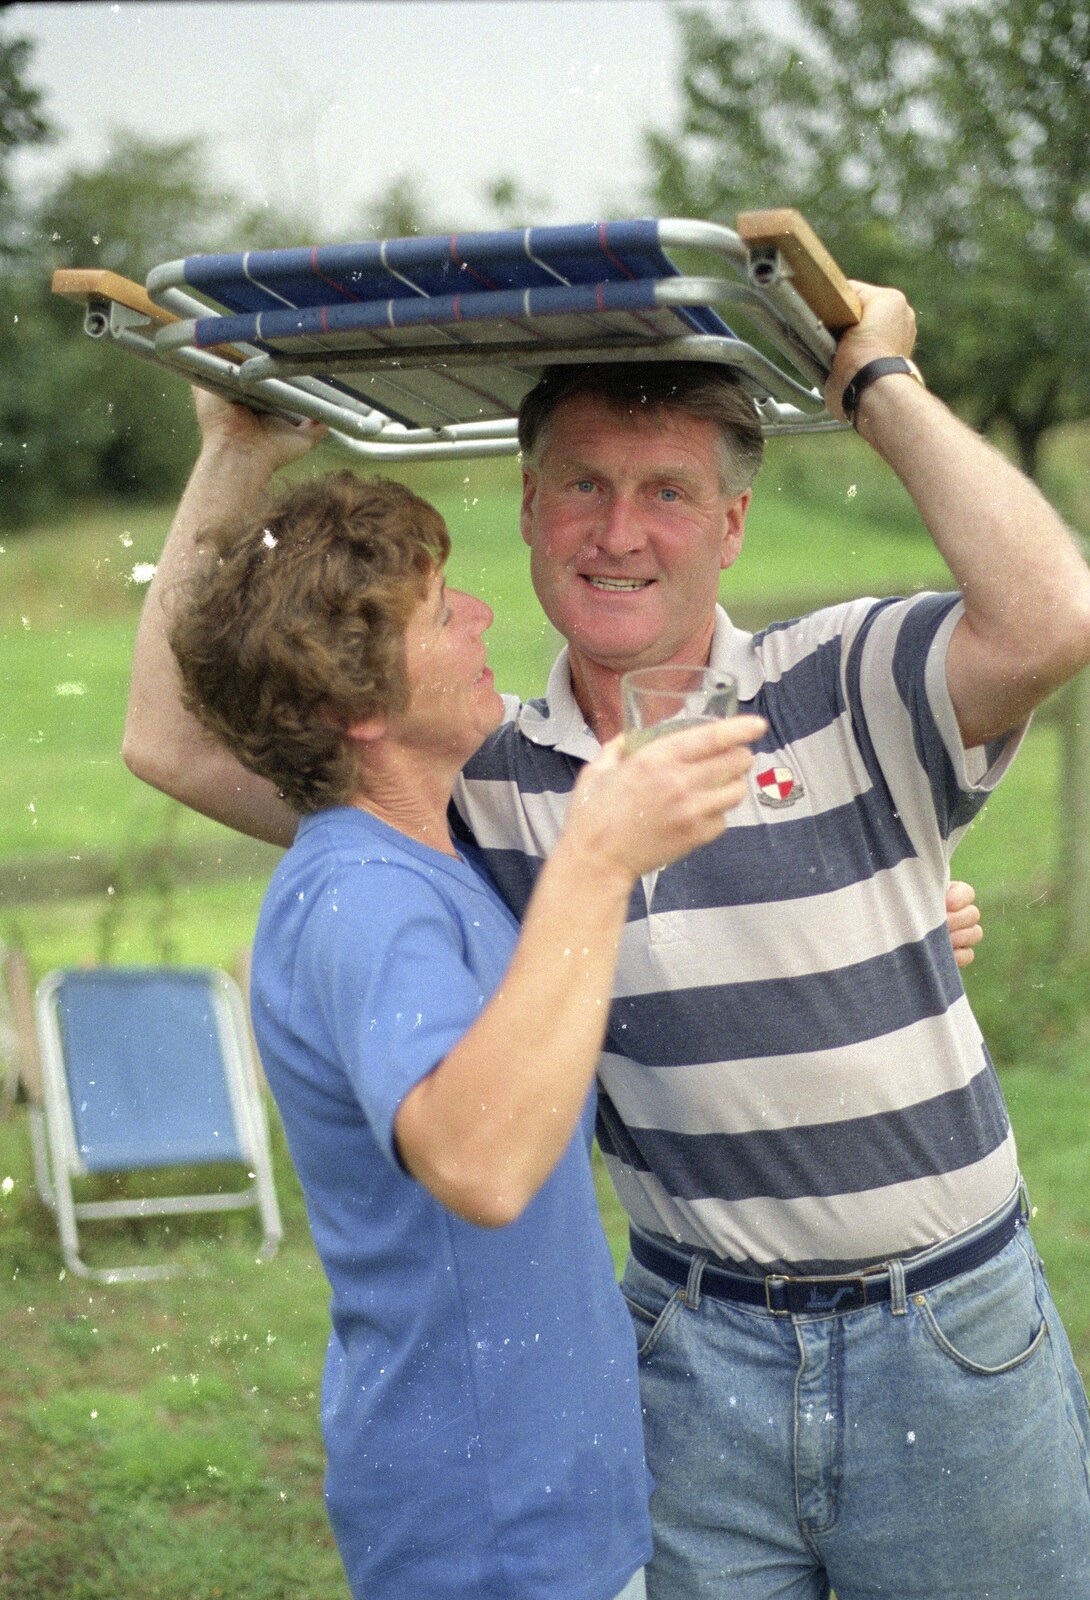 Sue's Fire Dance, Stuston, Suffolk - 21st July 1990: Bernie and Brenda take shelter under a camping chair